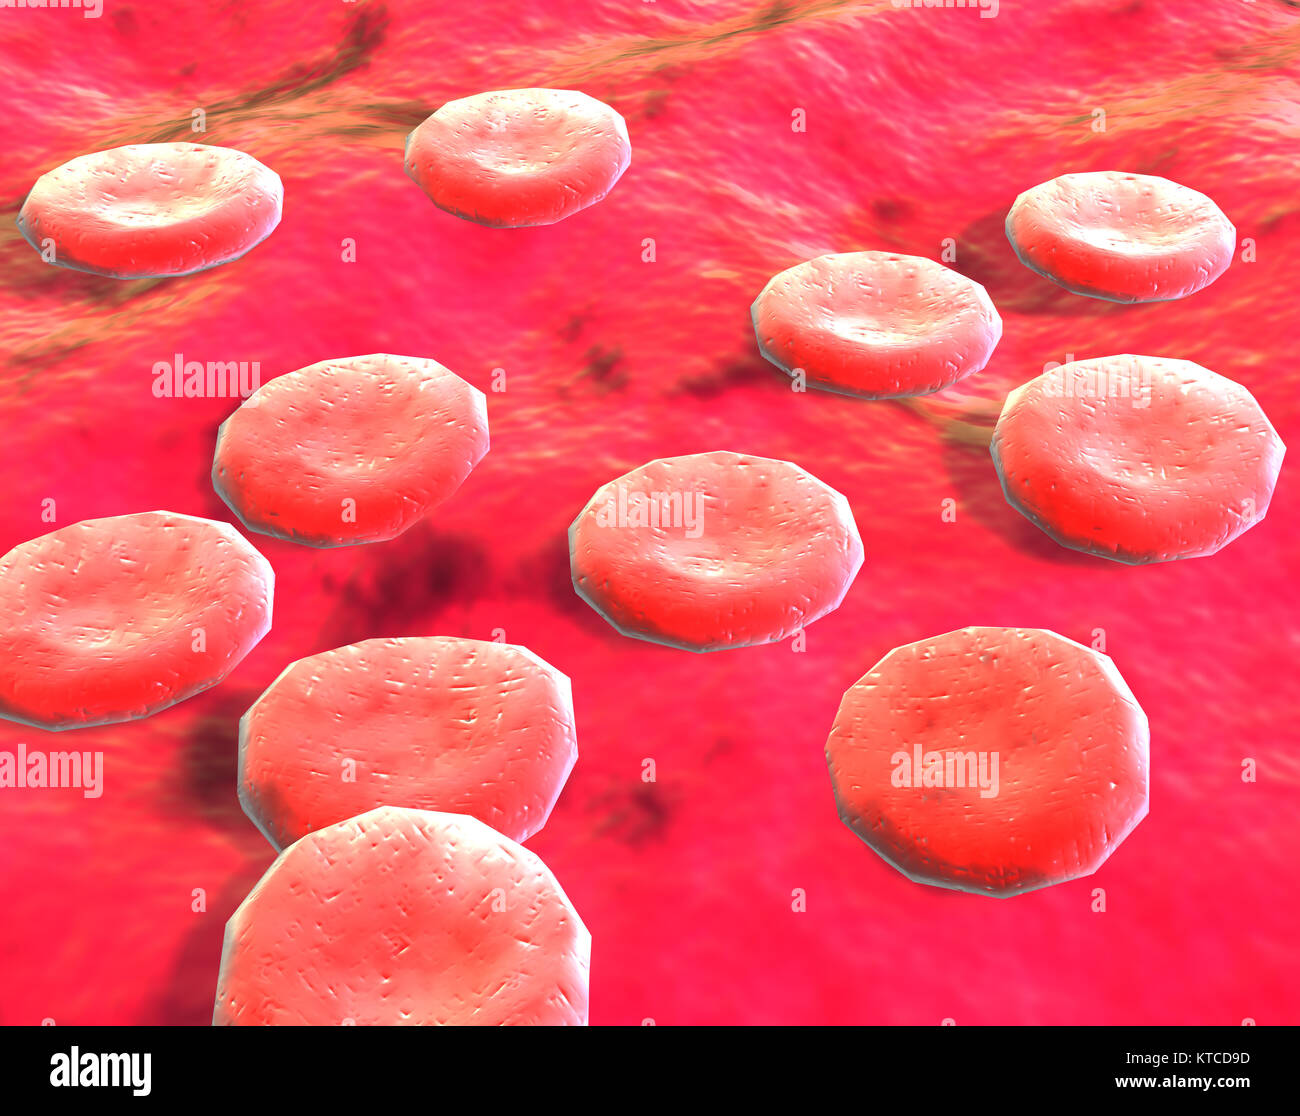 blood cells in vein Stock Photo